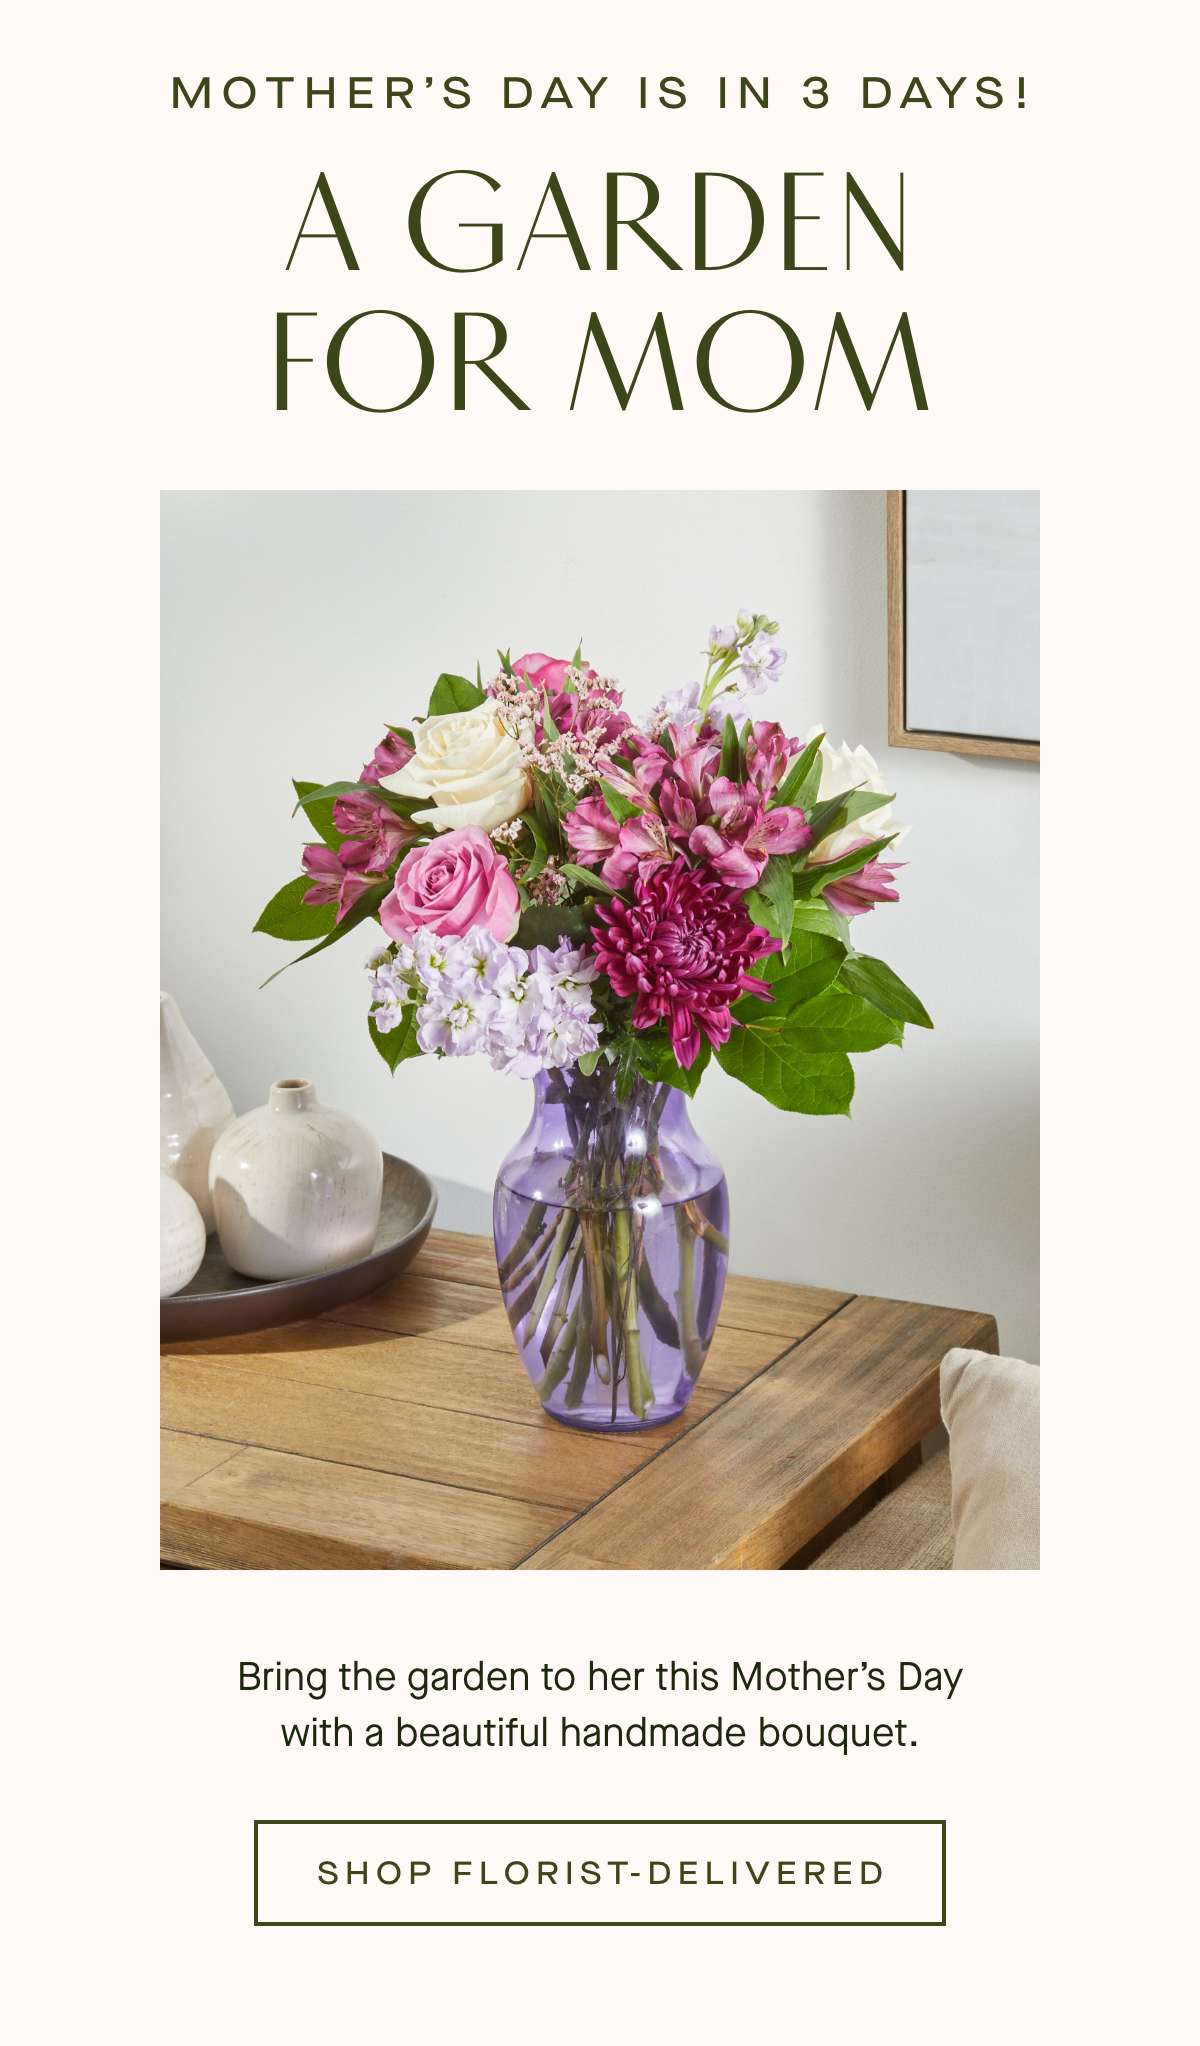 Mother's Day is in 3 days! A GARDEN FOR MOM - Bring the garden to her this Mother's Day with a beautiful handmade bouquet. - SHOP FLORIST-DELIVERED